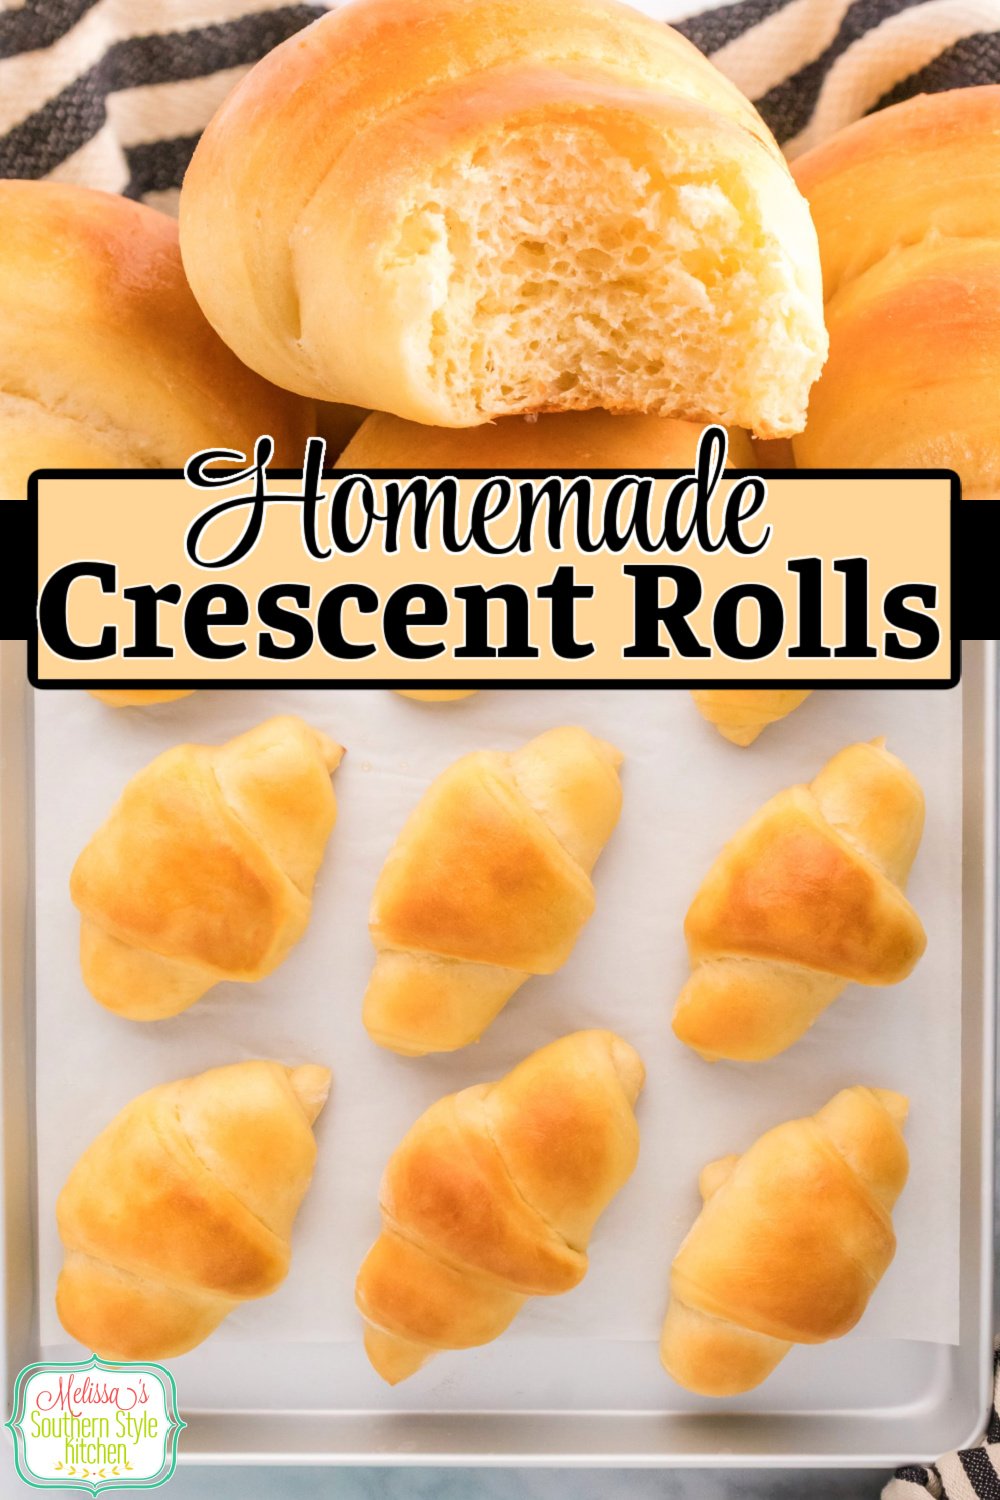 These soft and fluffy Crescent Rolls melt in your mouth served straight from the oven with butter and a drizzle of honey #crescentrolls #homemadebread #breadrecipes #crescentrollrecipes #homemadecrescentrolls via @melissasssk